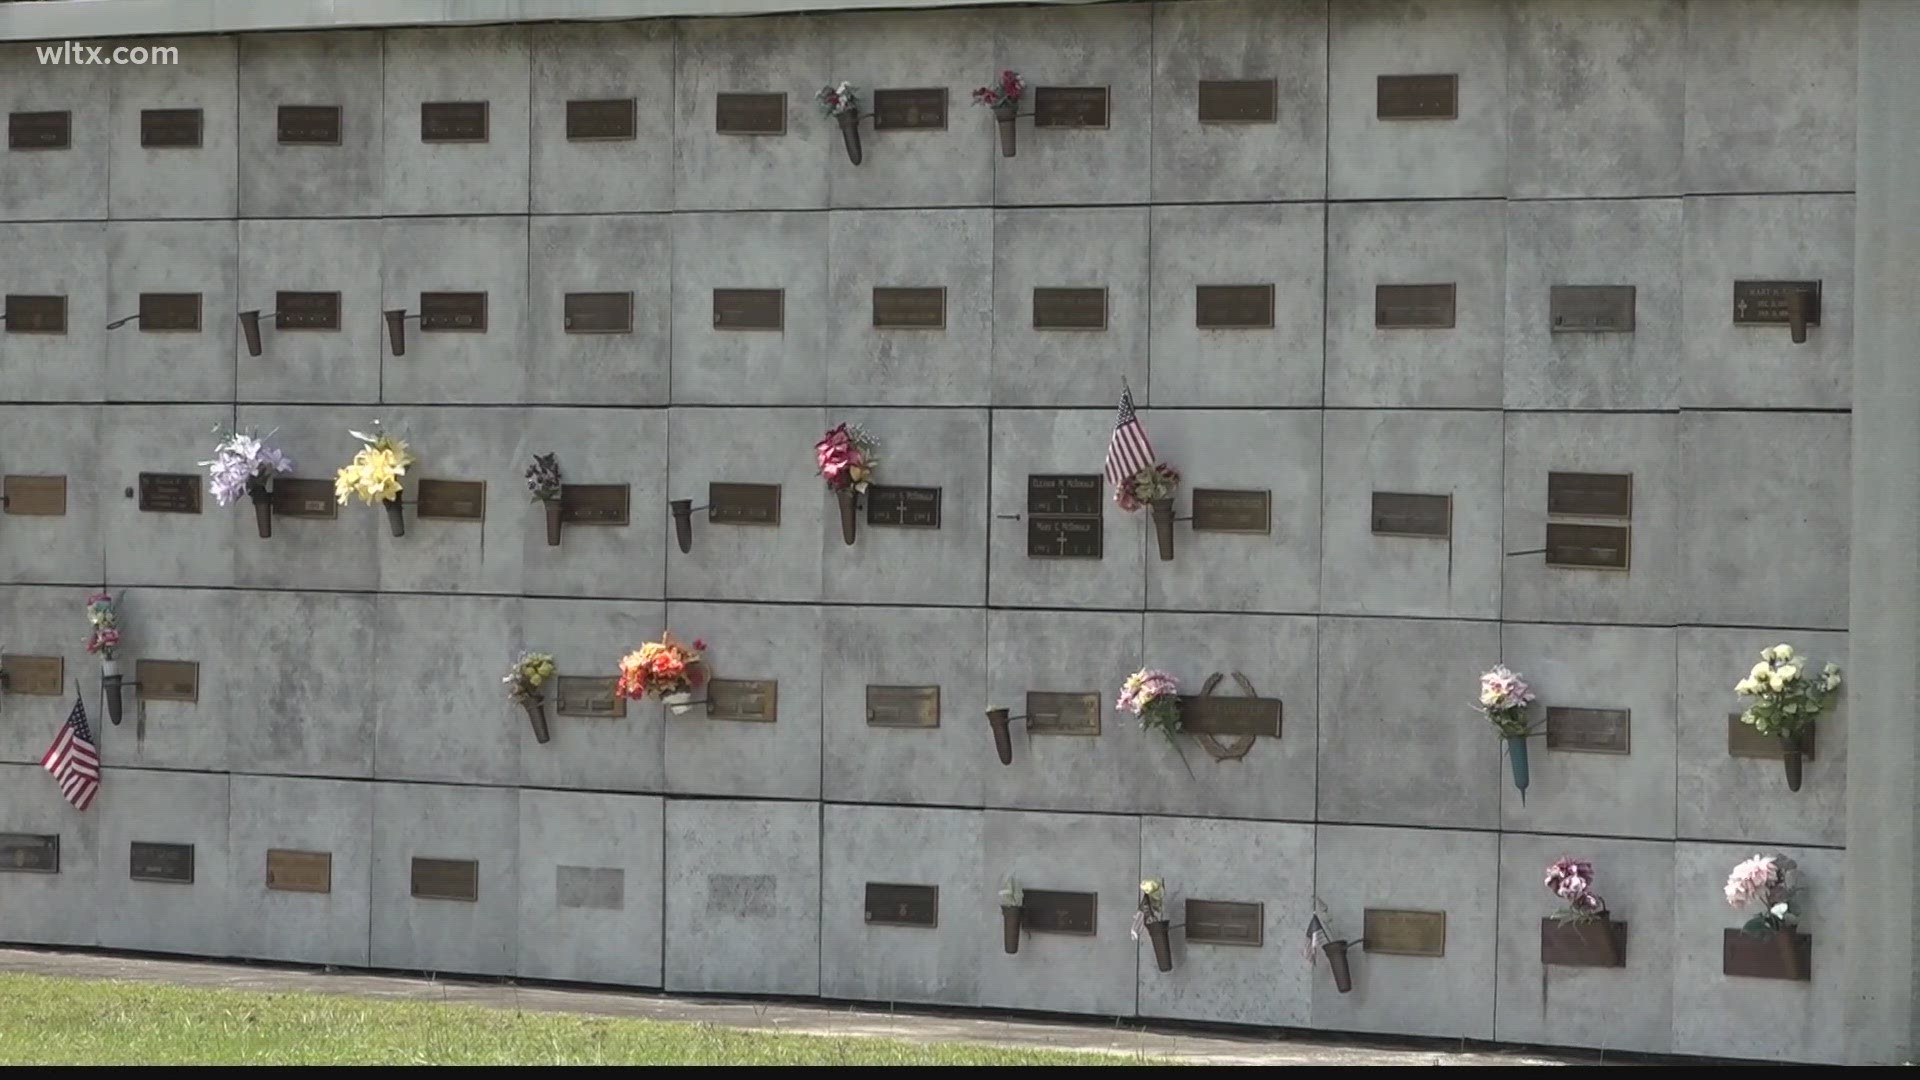 Forty families had flowers and vases stolen from the Forest Lawn Memorial park in Sumter.